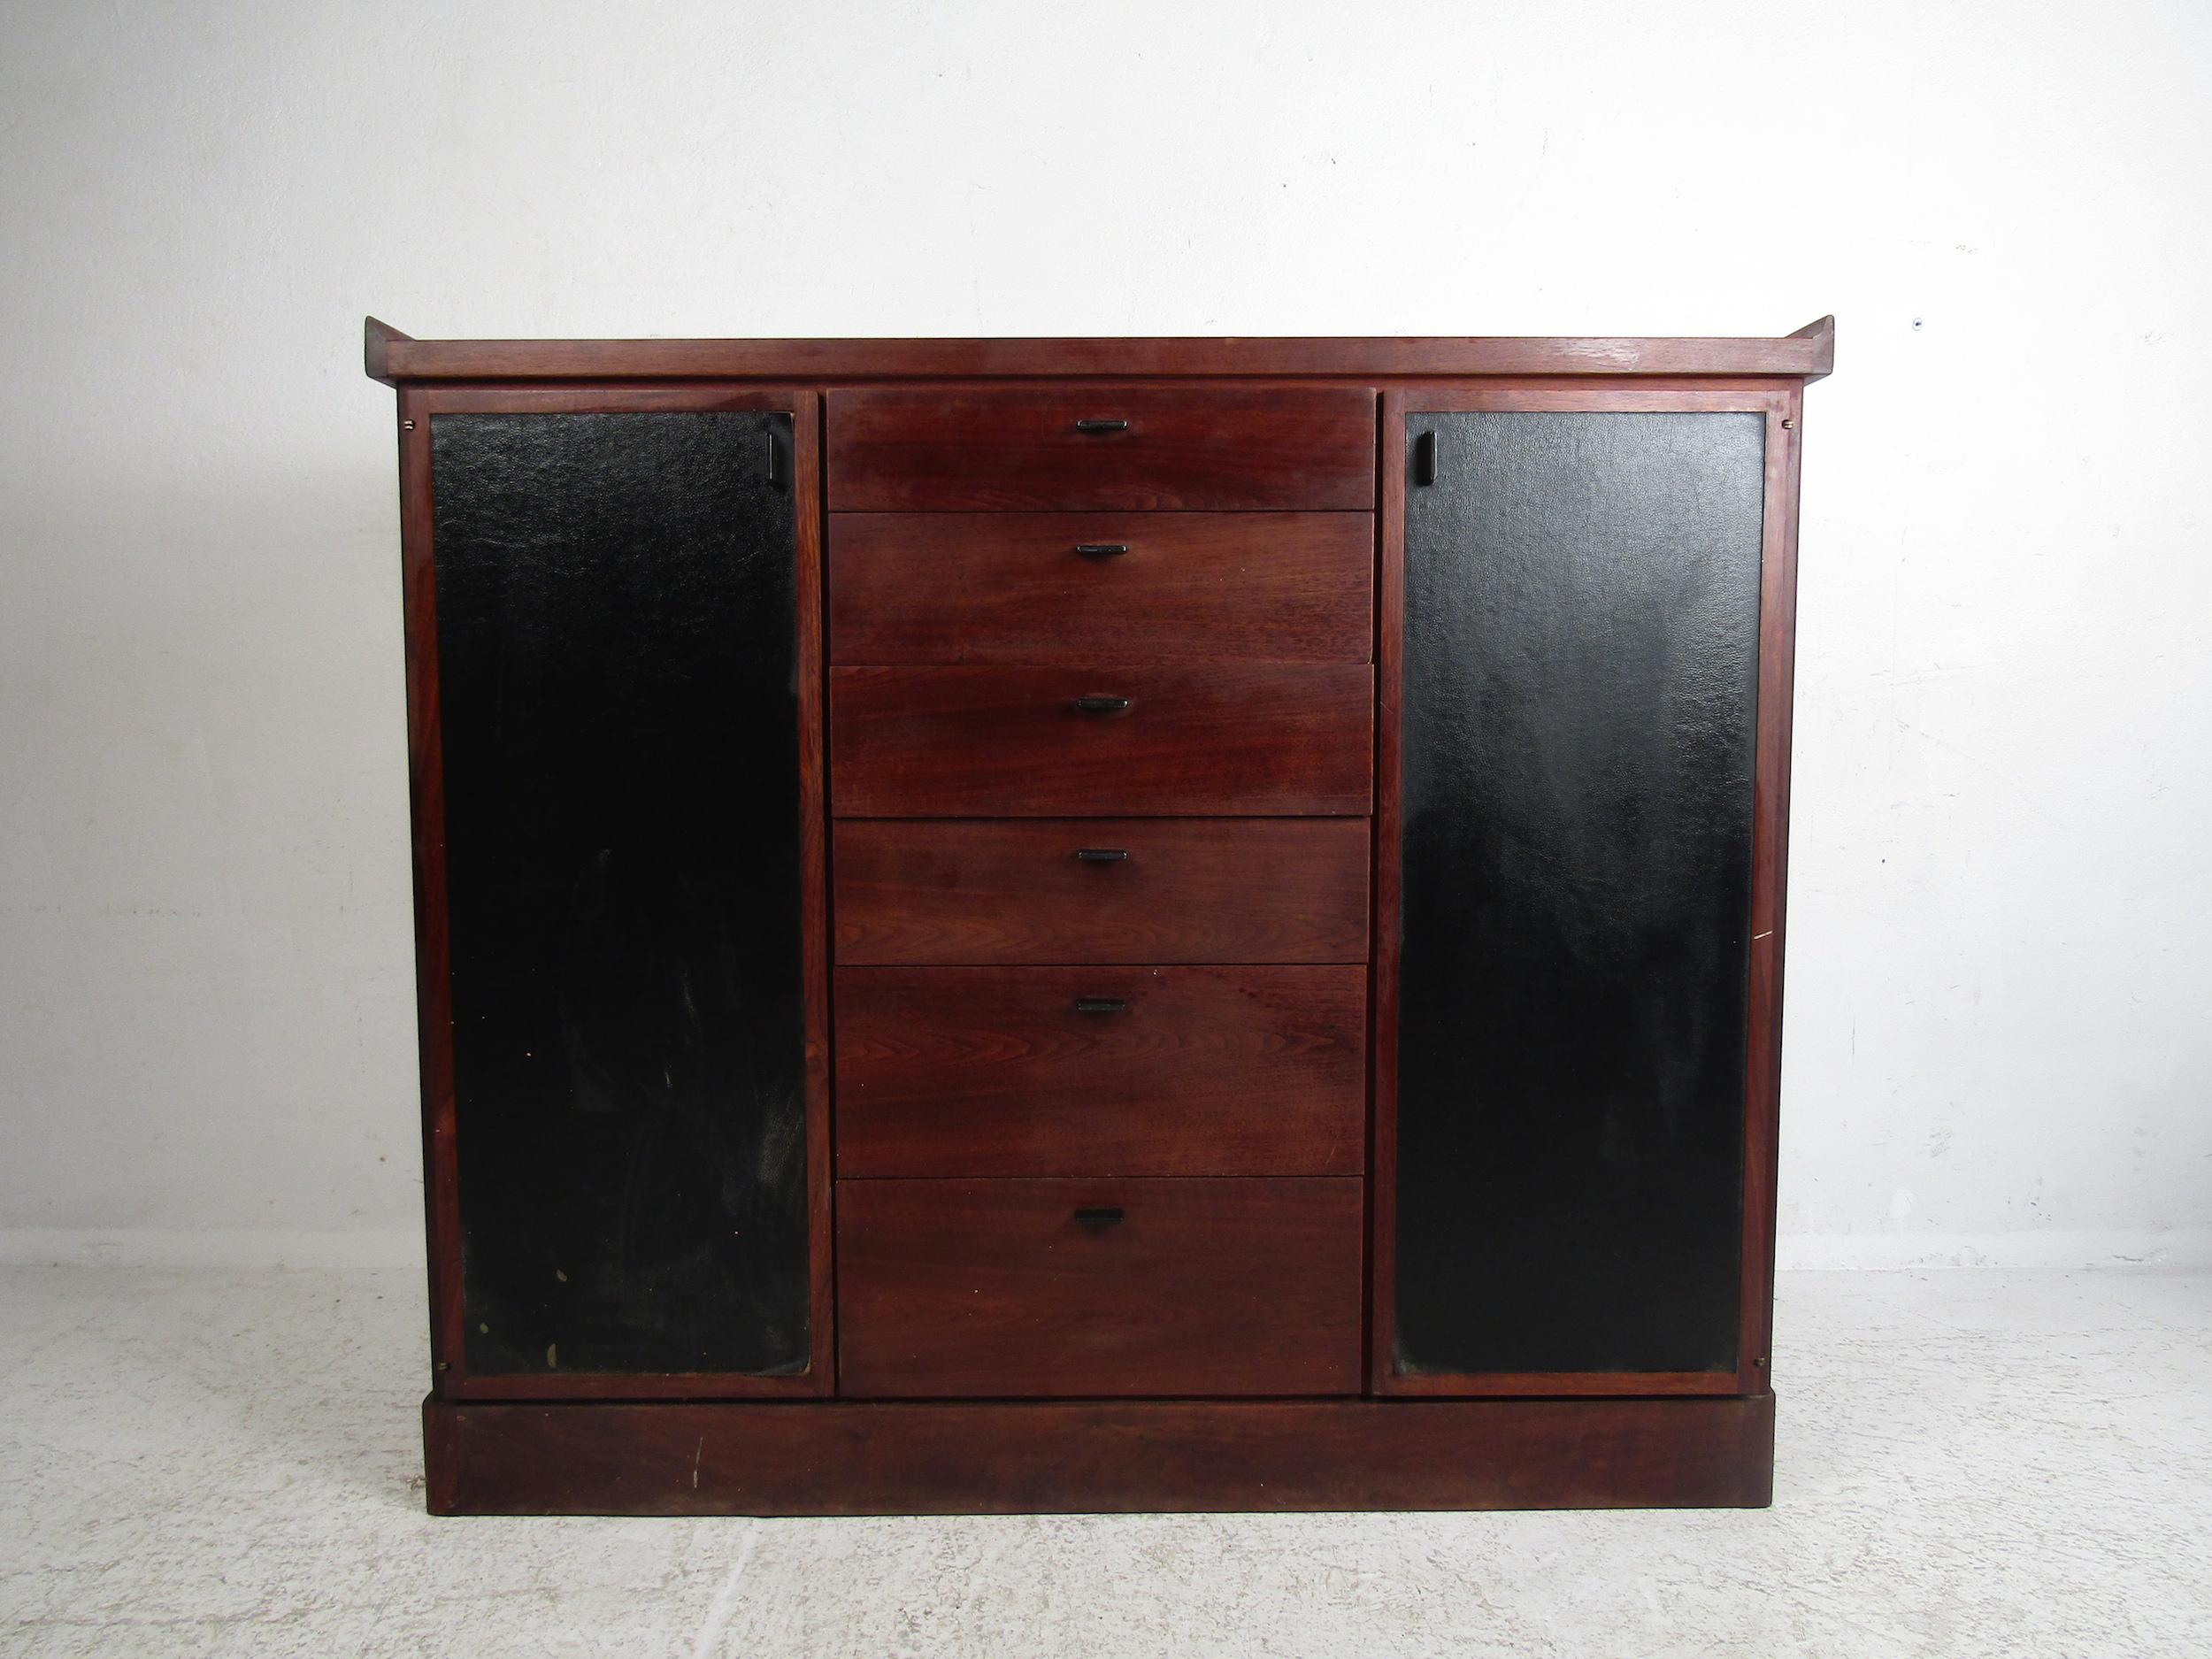 Stunning Mid-Century Modern highboy dresser. Six spacious dovetail-jointed drawers line the center of the case and are flanked by leather front cabinet doors with adjustable shelving within. Raised edges at the case's peak provide a nice accent to